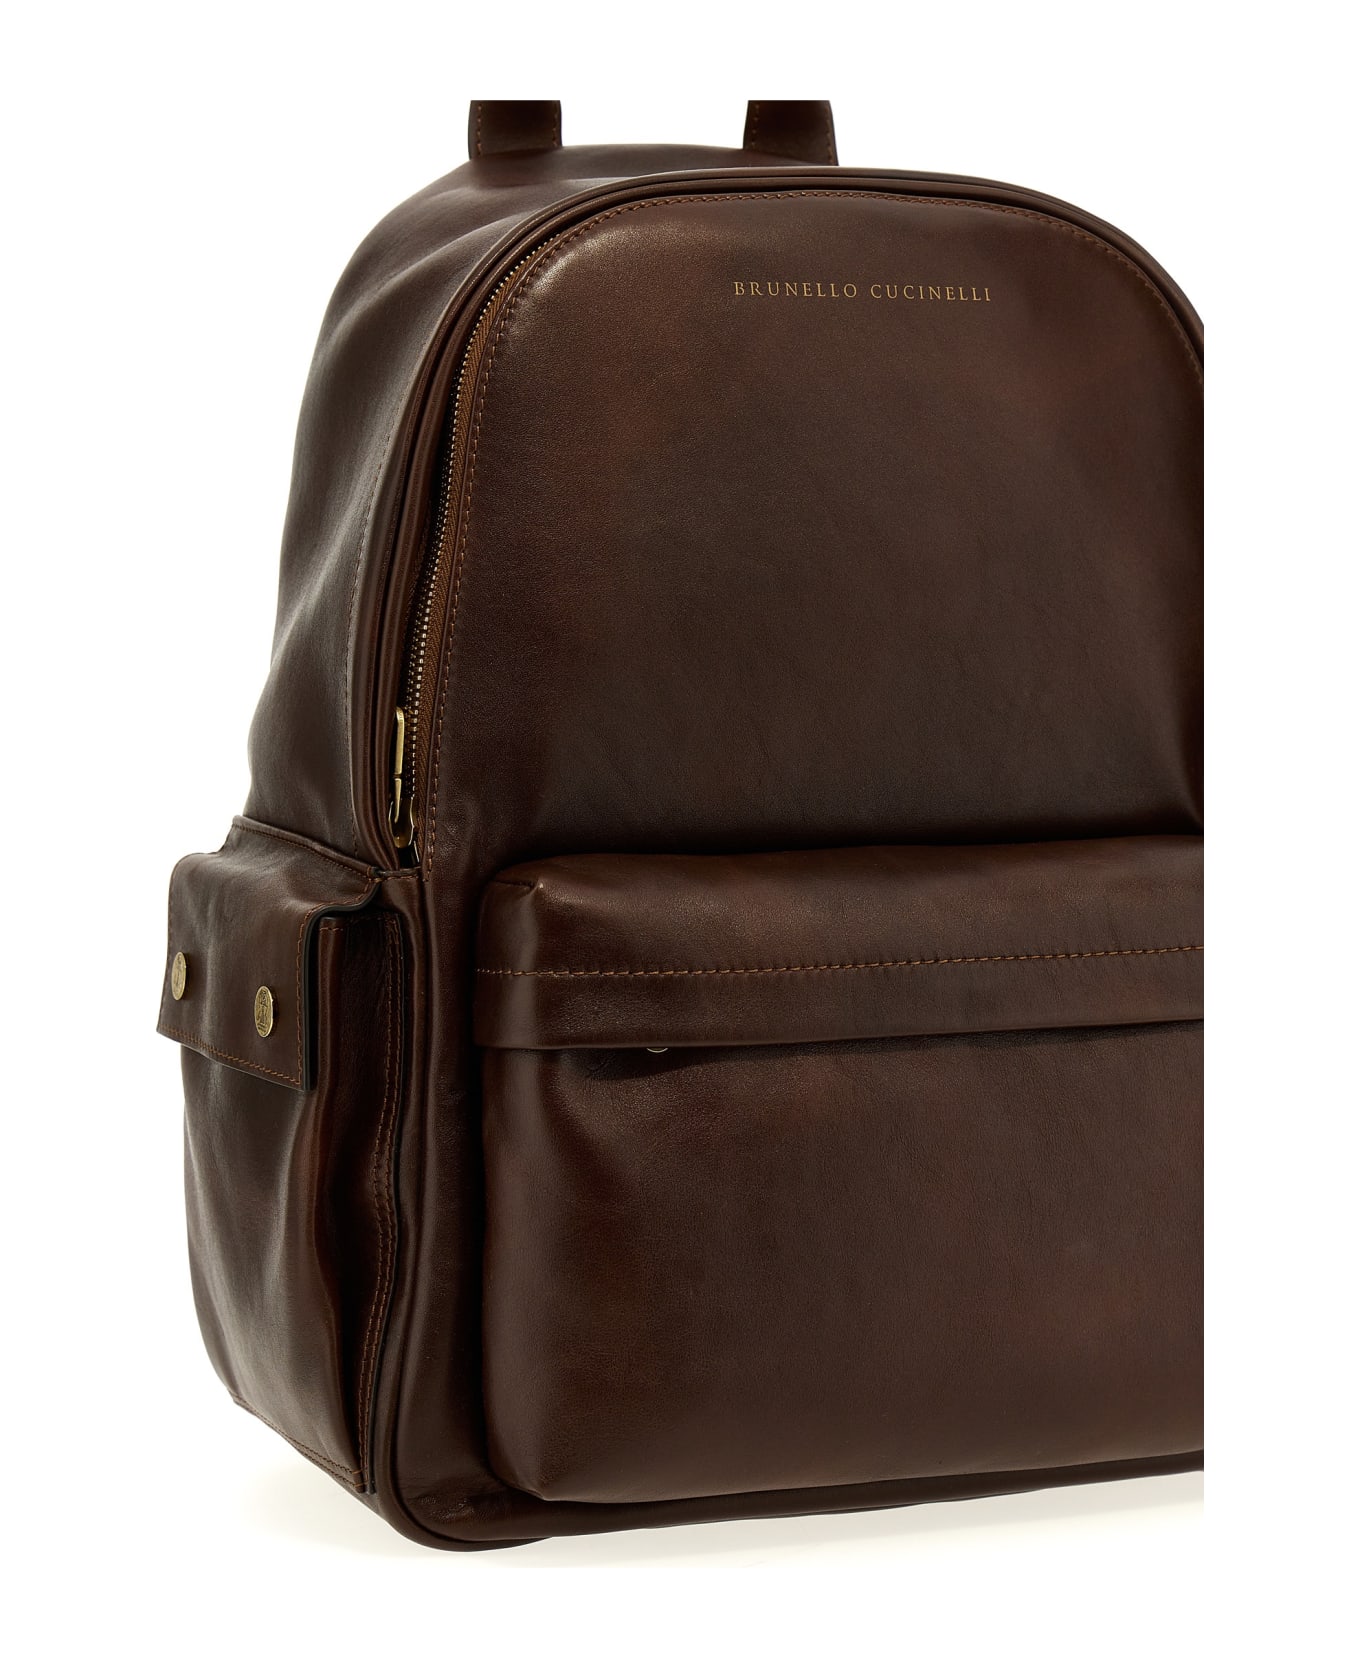 Brunello Cucinelli Leather Backpack - Brown バックパック